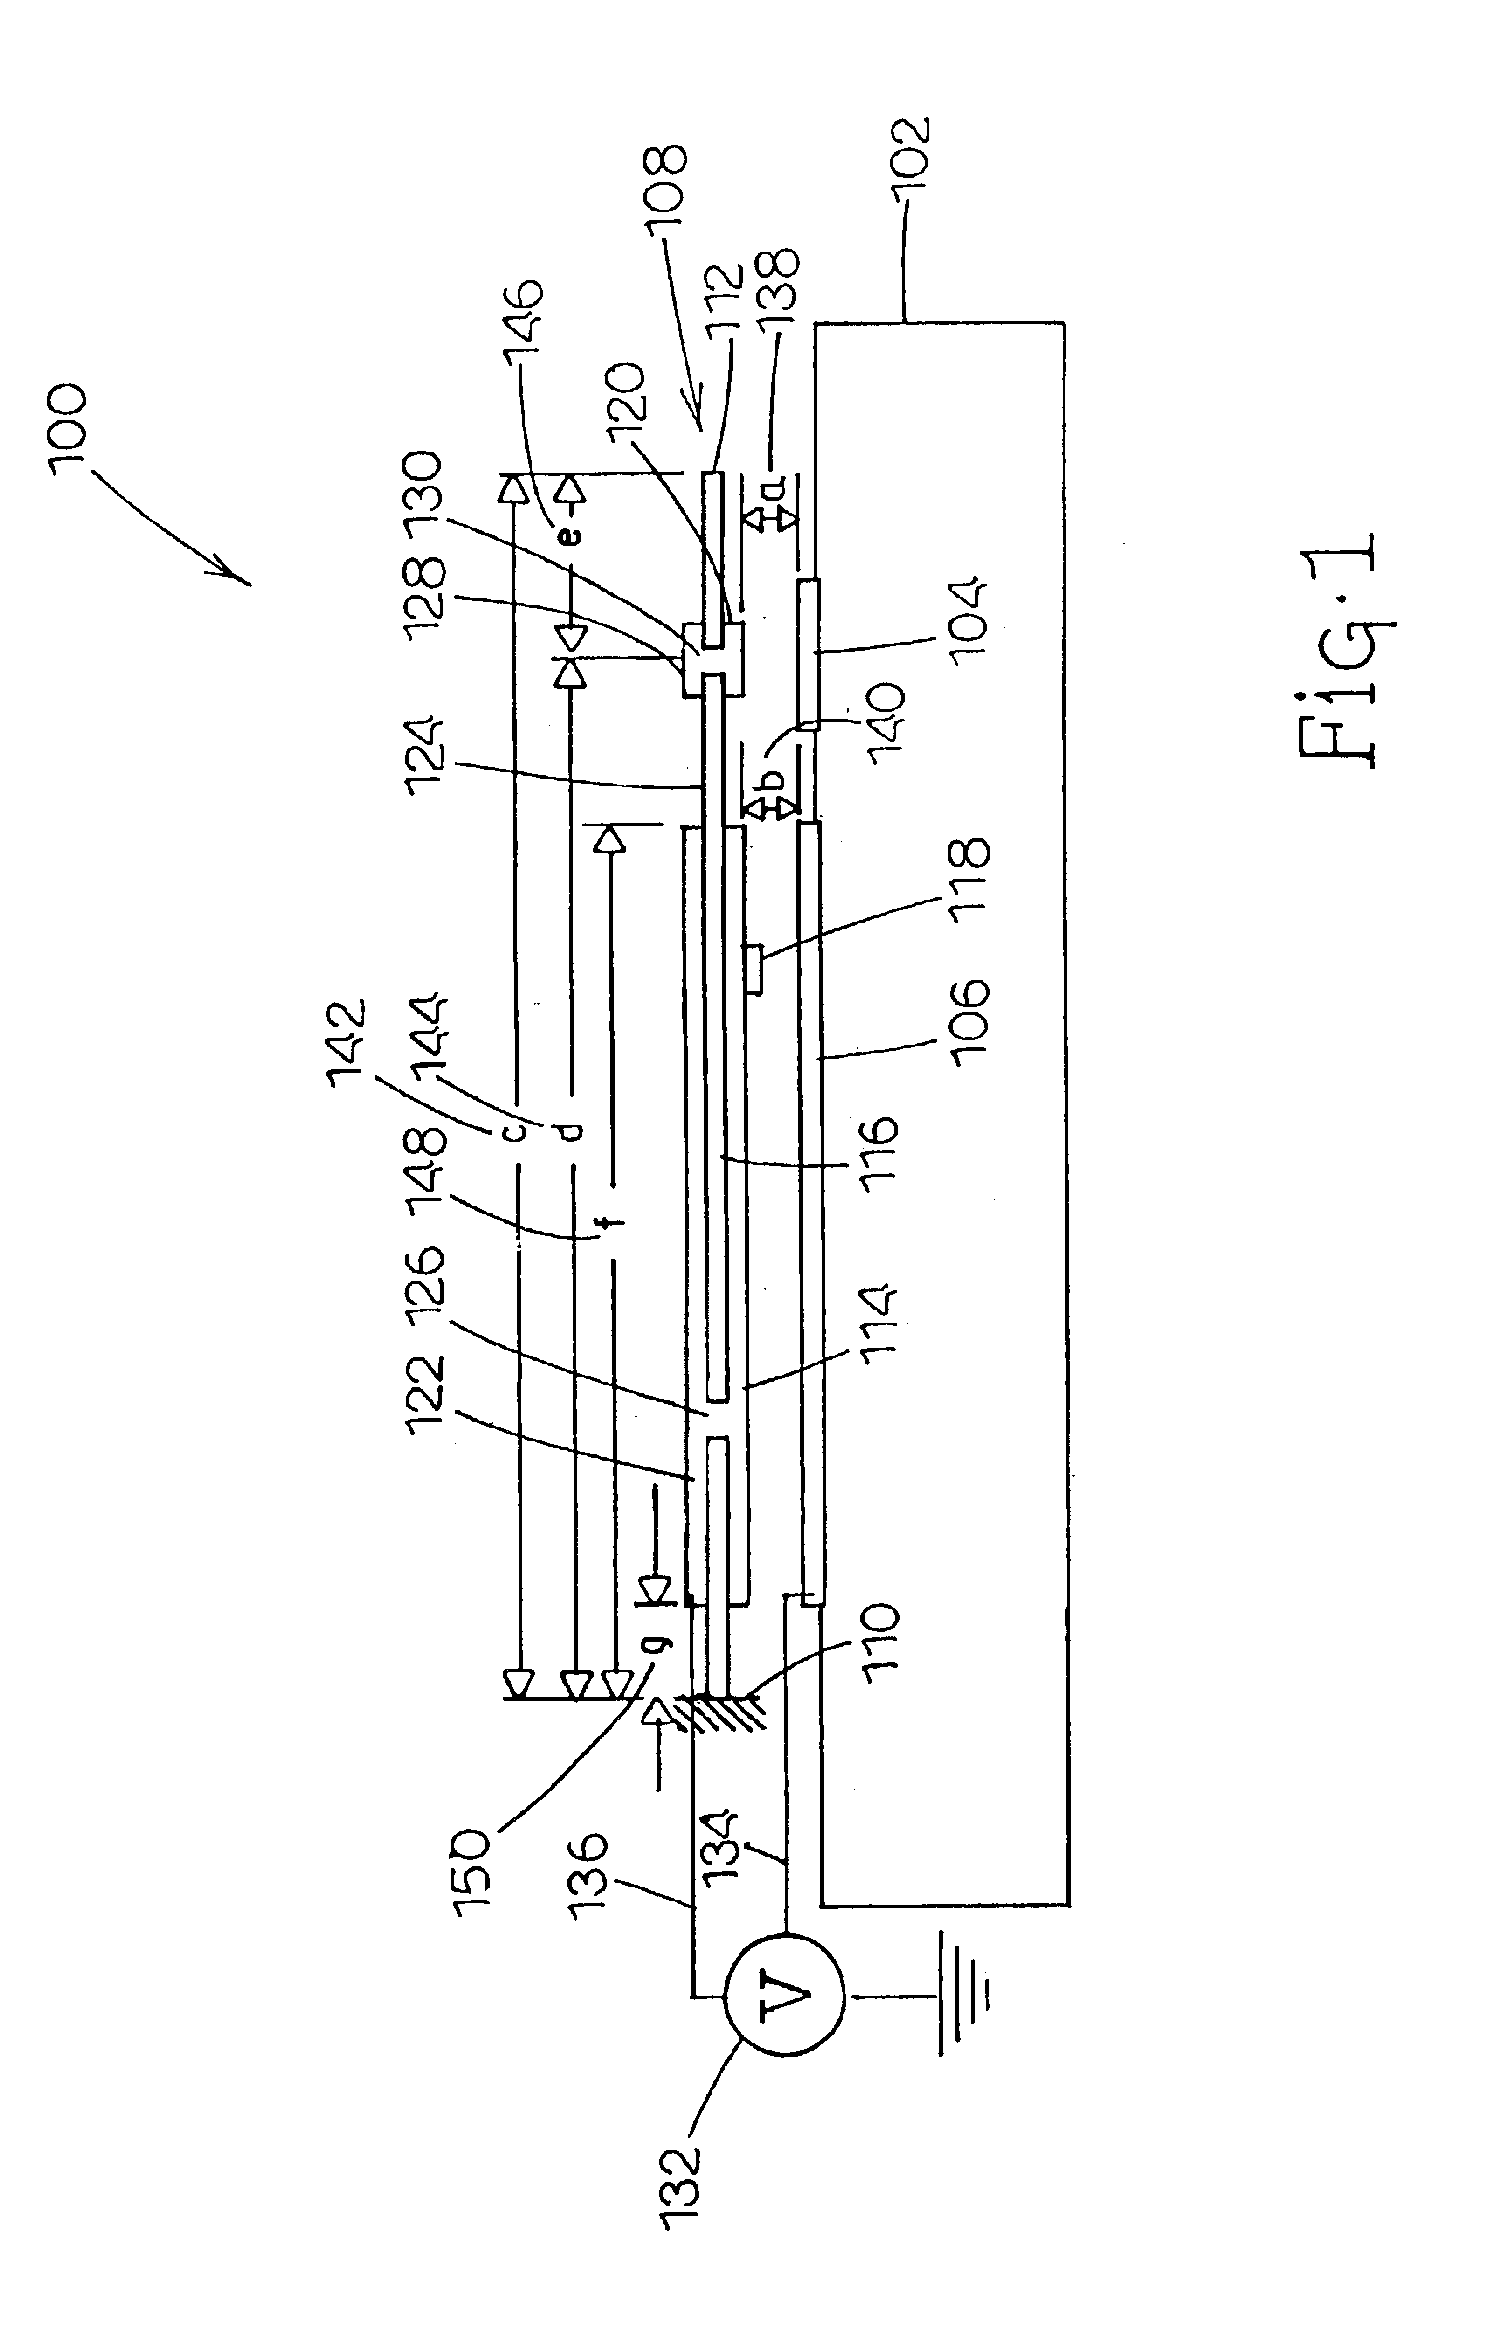 MEMS device having contact and standoff bumps and related methods